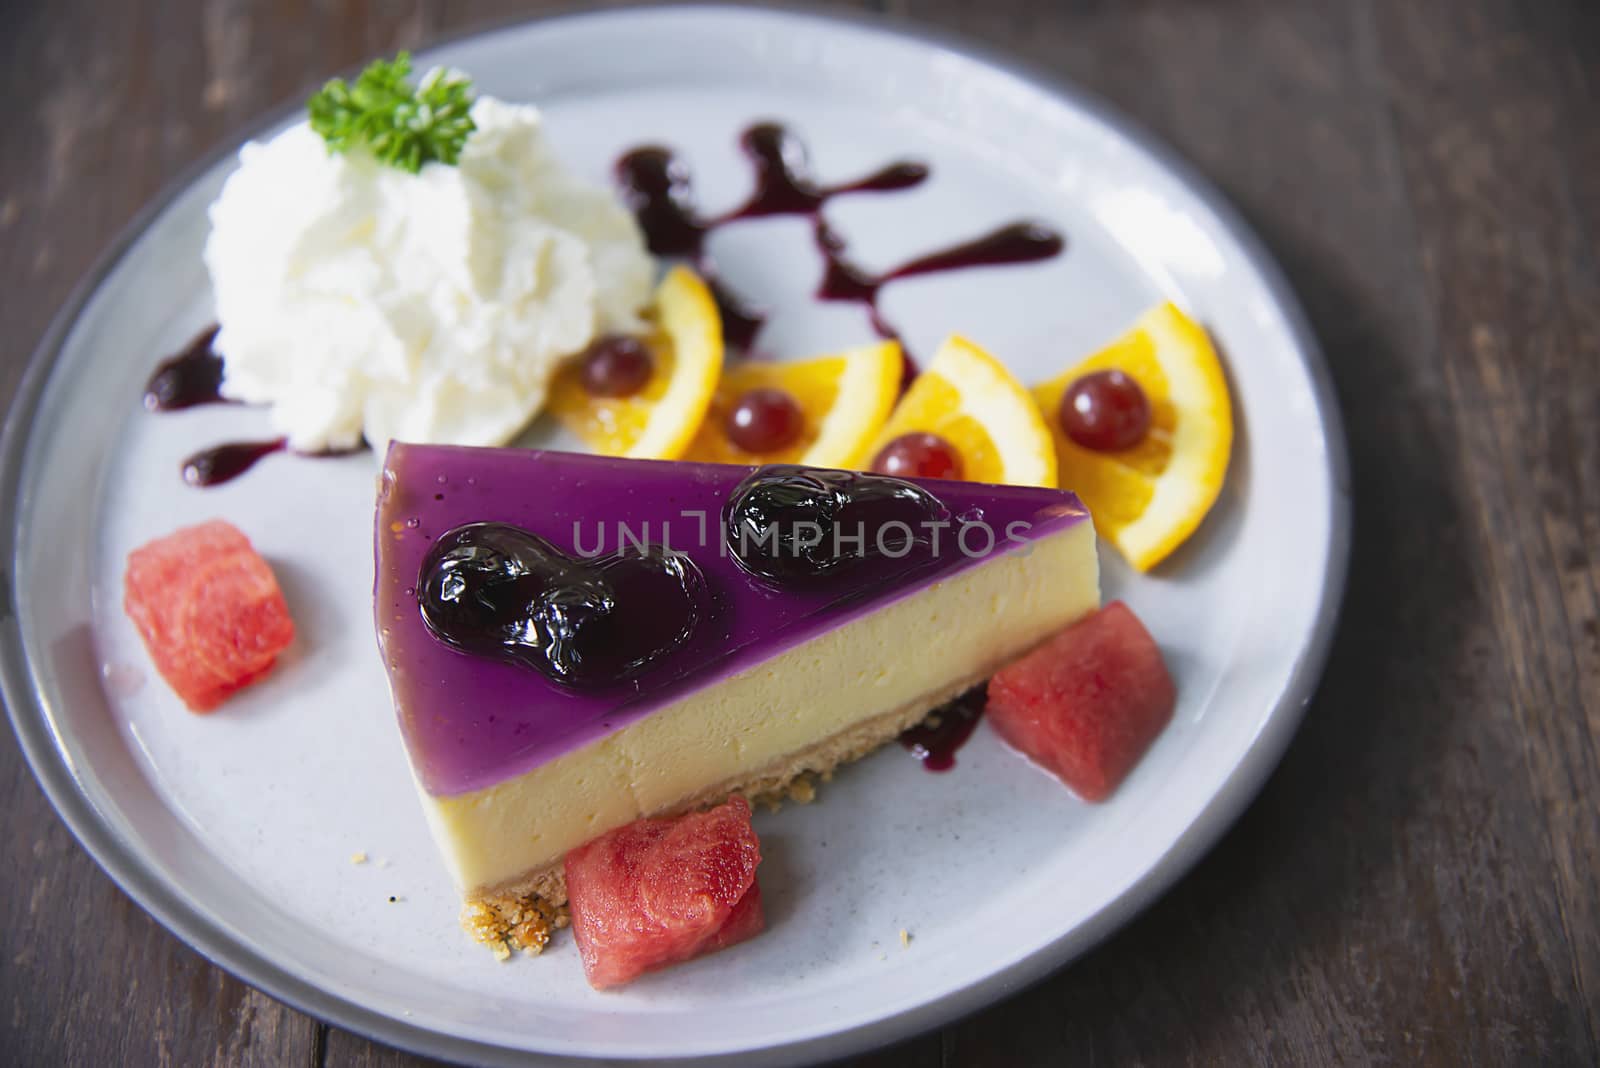 Colorful cheese cake blueberry favor with well decorated fruit pieces and whipped cream in white plate - cake recipe menu concept